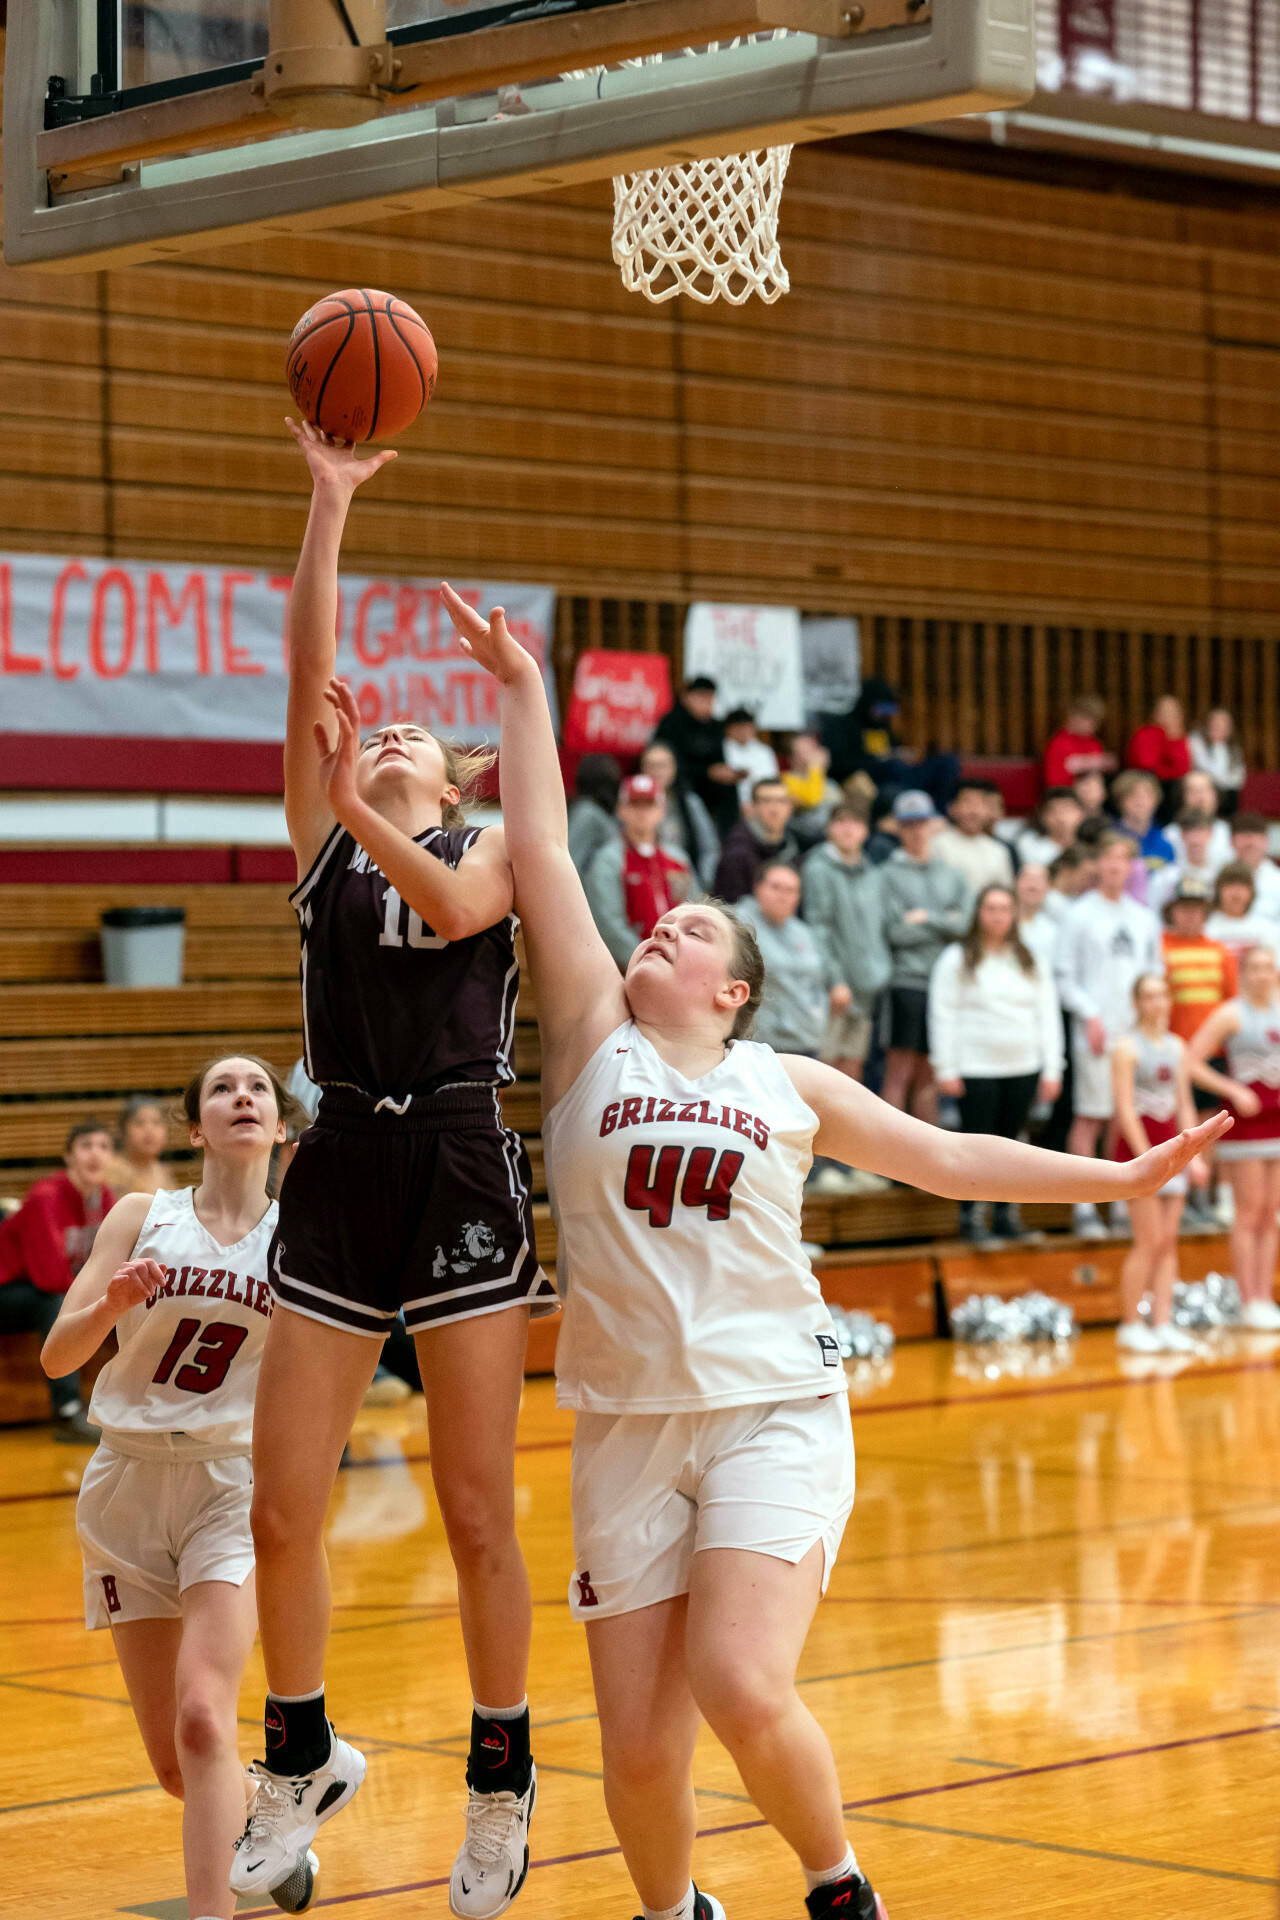 PHOTO BY FOREST WORGUM Montesano’s Mikayla Stanfield (10) shoots against Hoquiam’s Sydney Gordon (44) during the Bulldogs’ 65-31 win on Friday in Hoquiam.